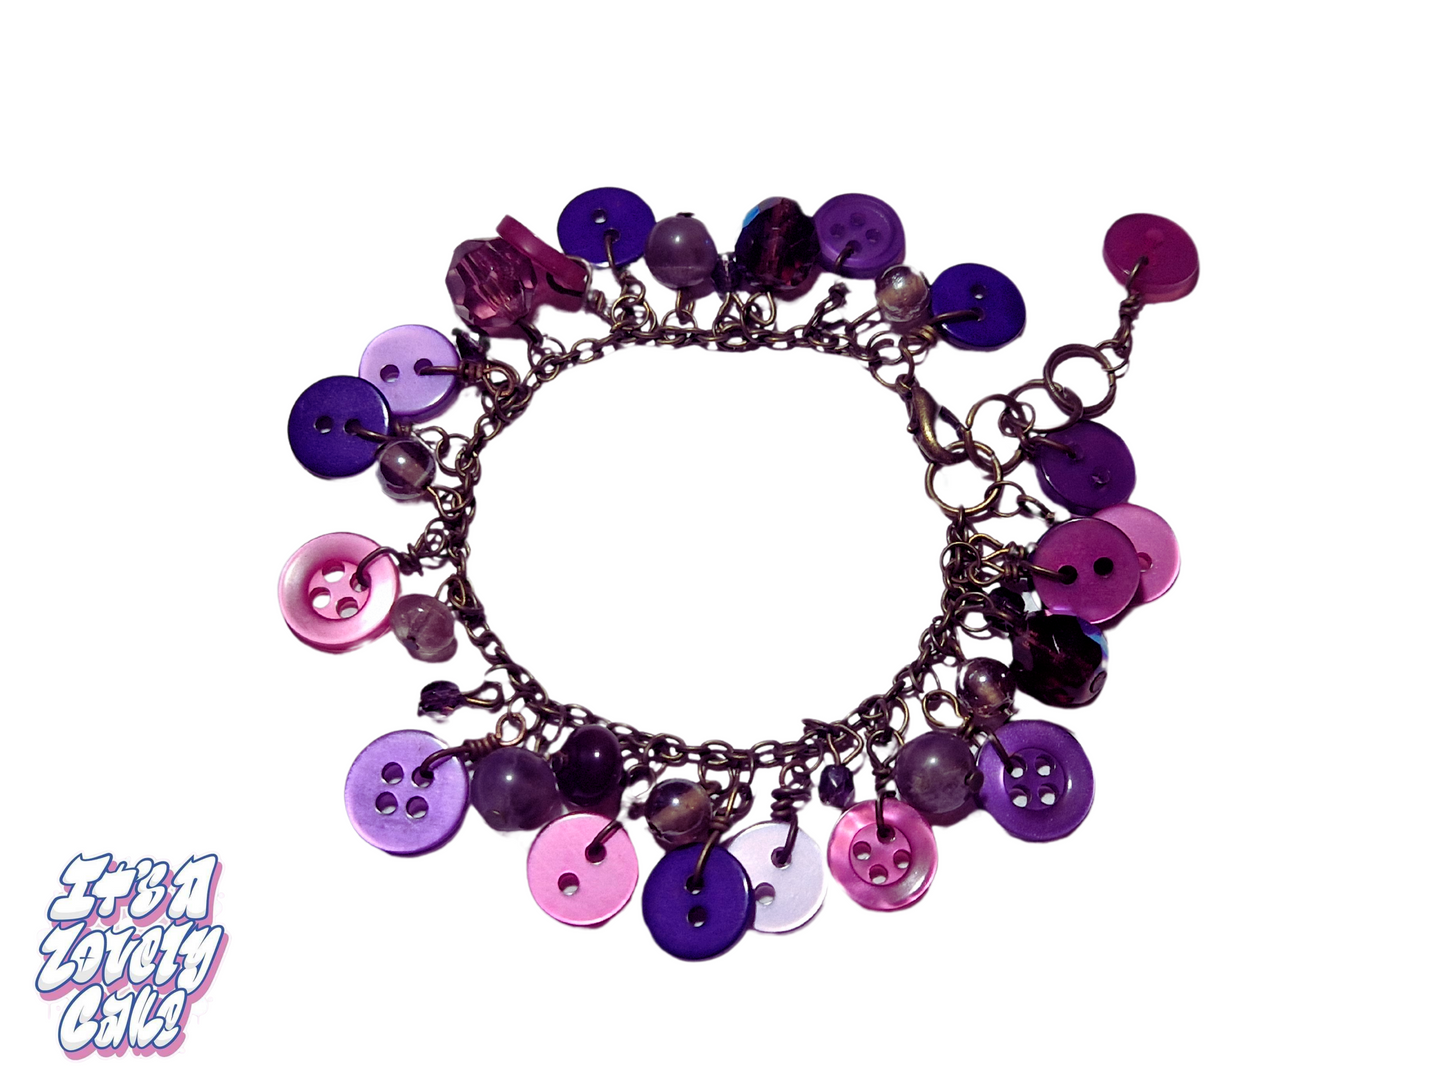 It's A Lovely Cake Jewellery - Purple and Pink Beaded Button Bracelet